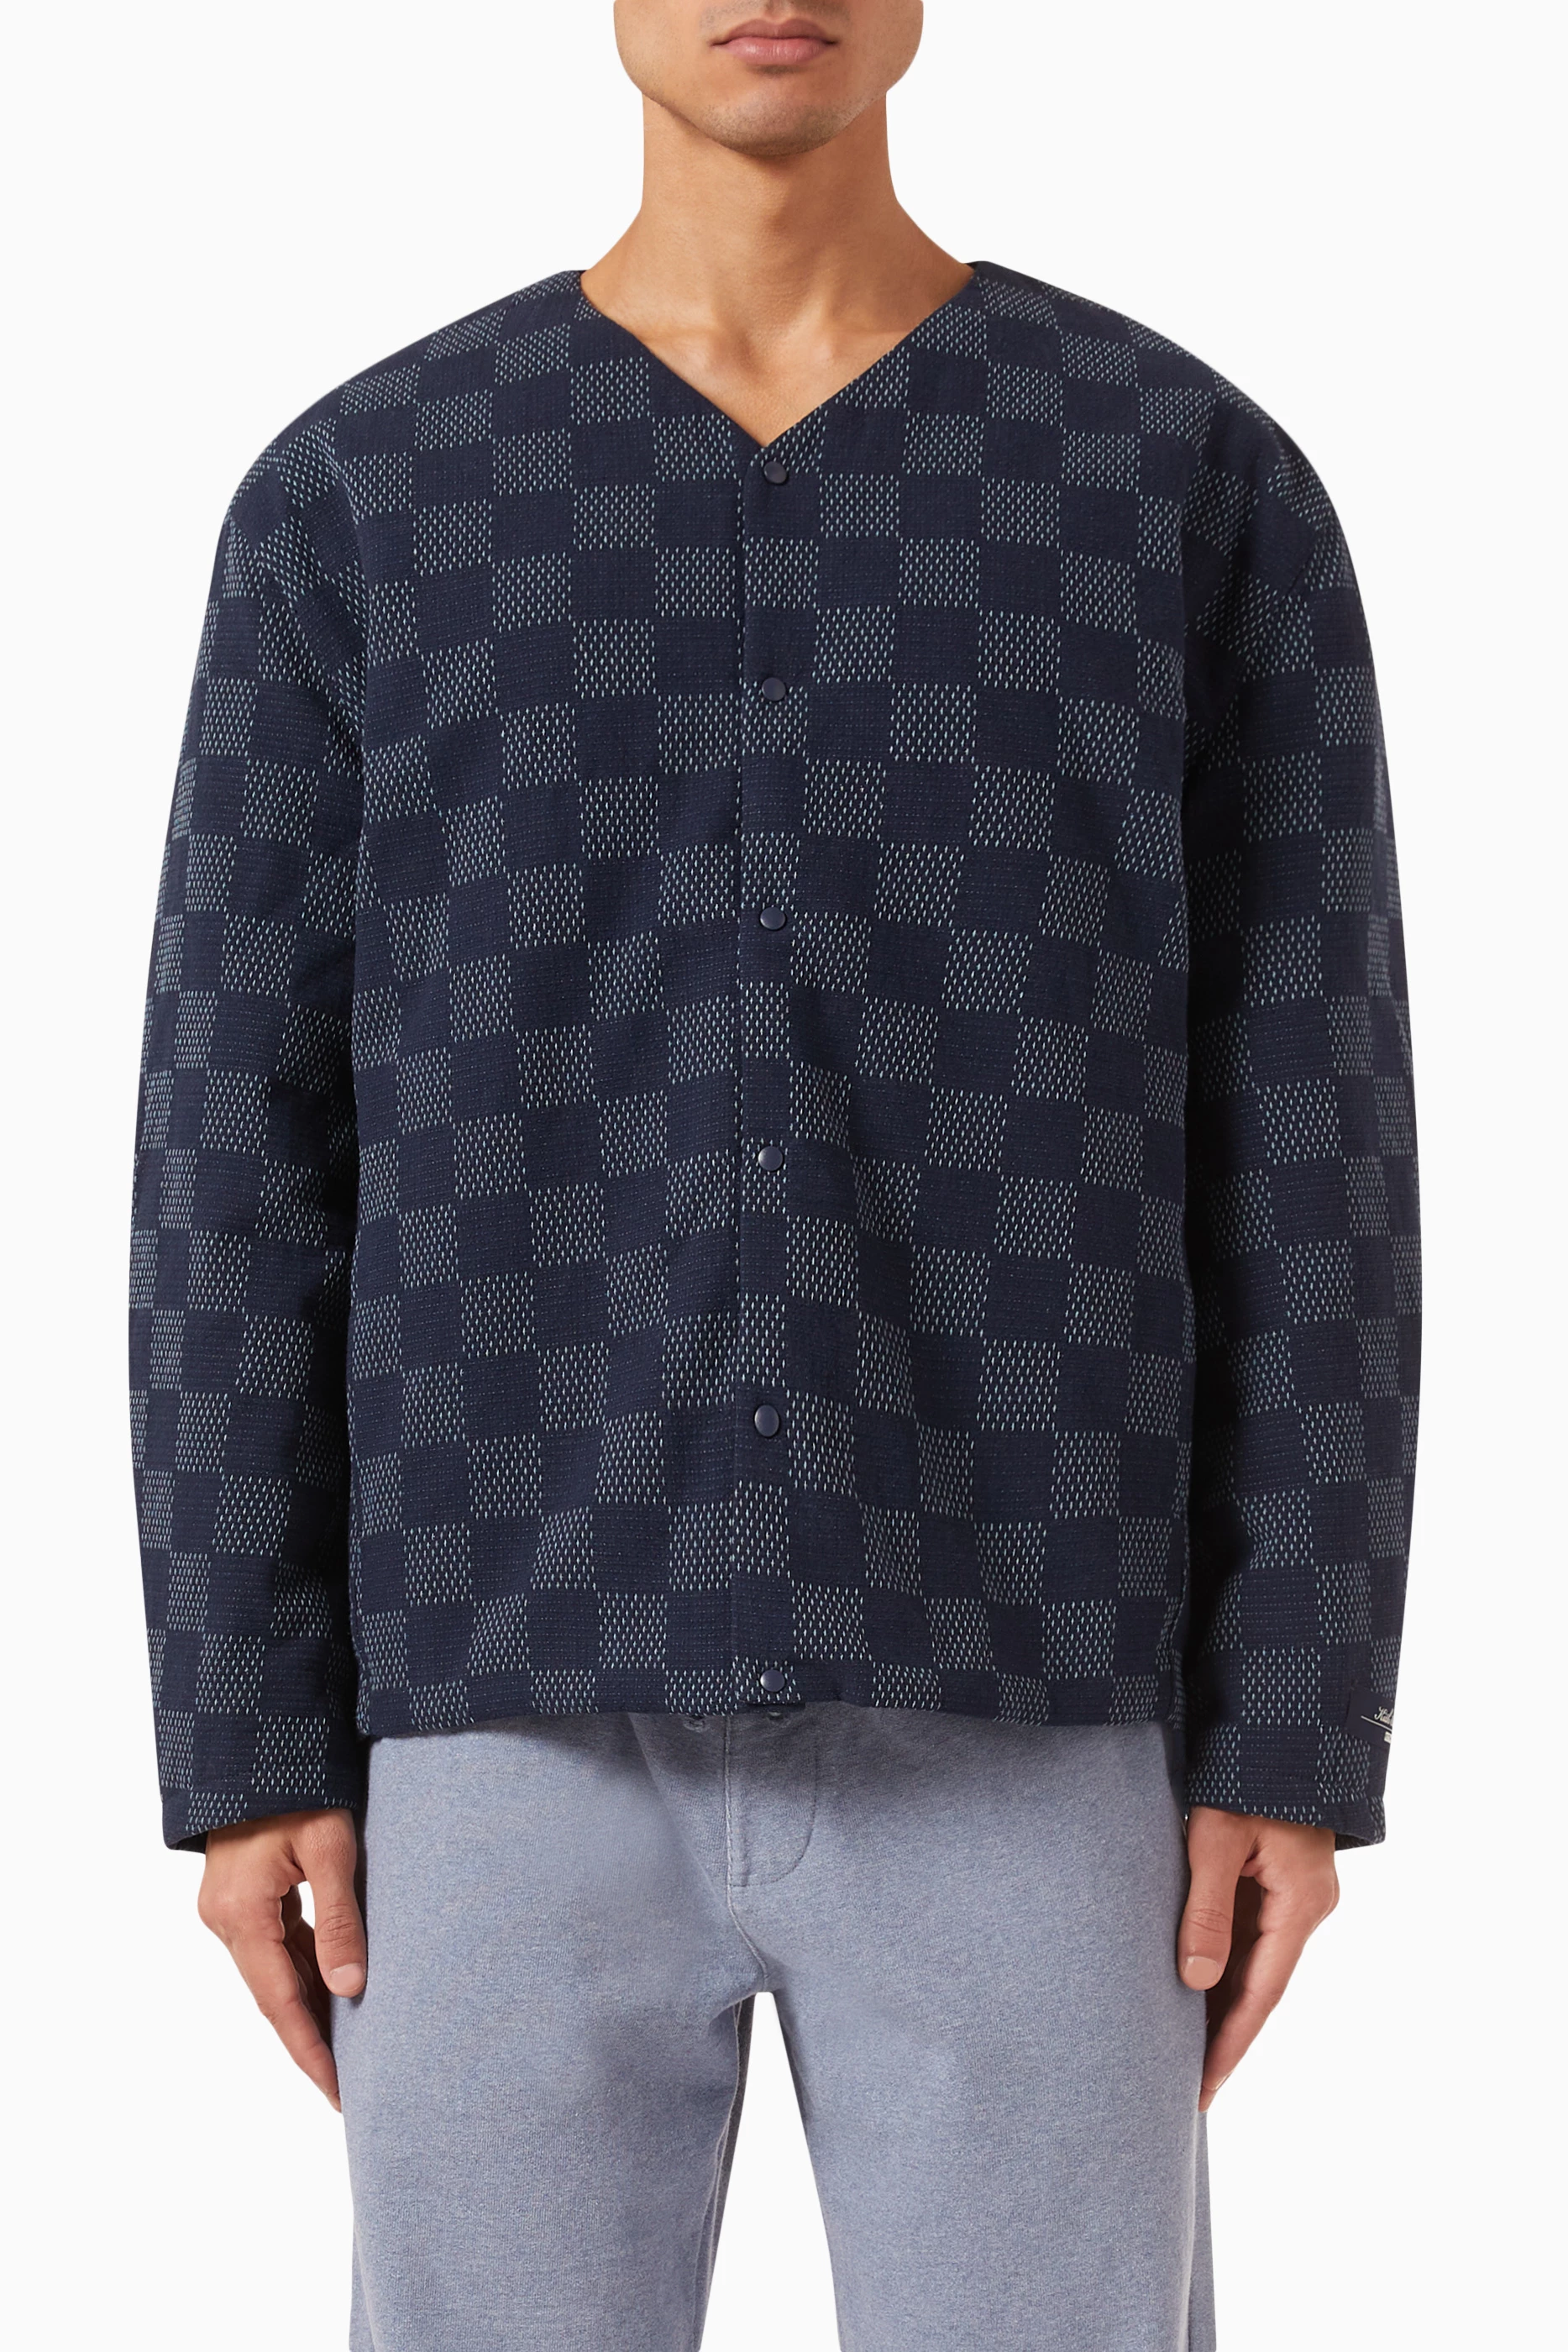 Kith Check Denim Winfield Quilted Liner - Eve